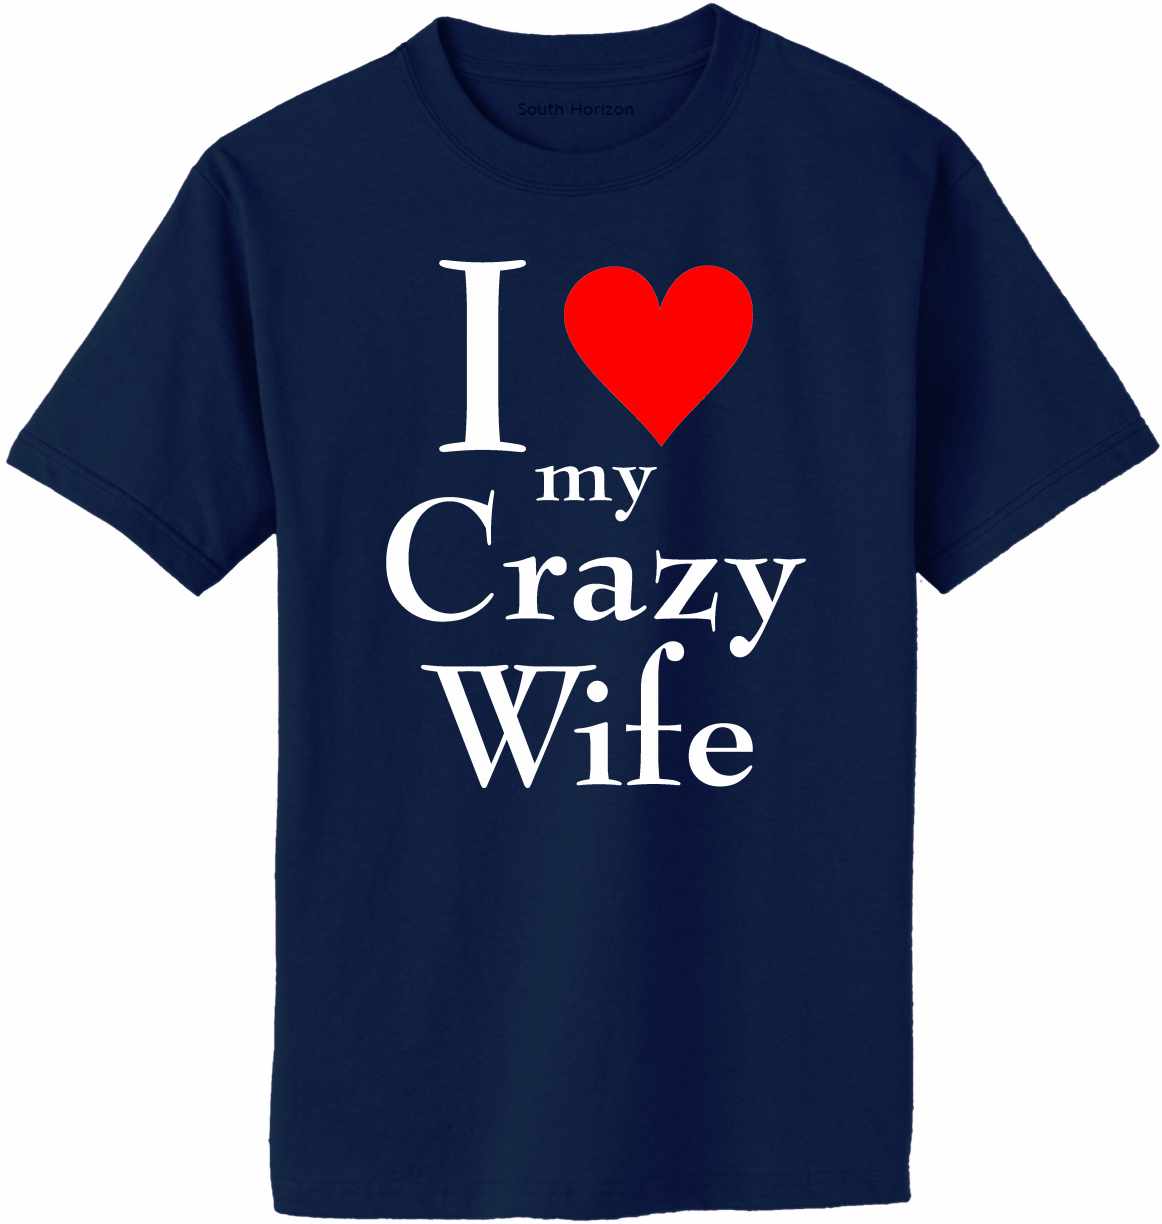 I LOVE MY CRAZY WIFE Adult T-Shirt (#1024-1)